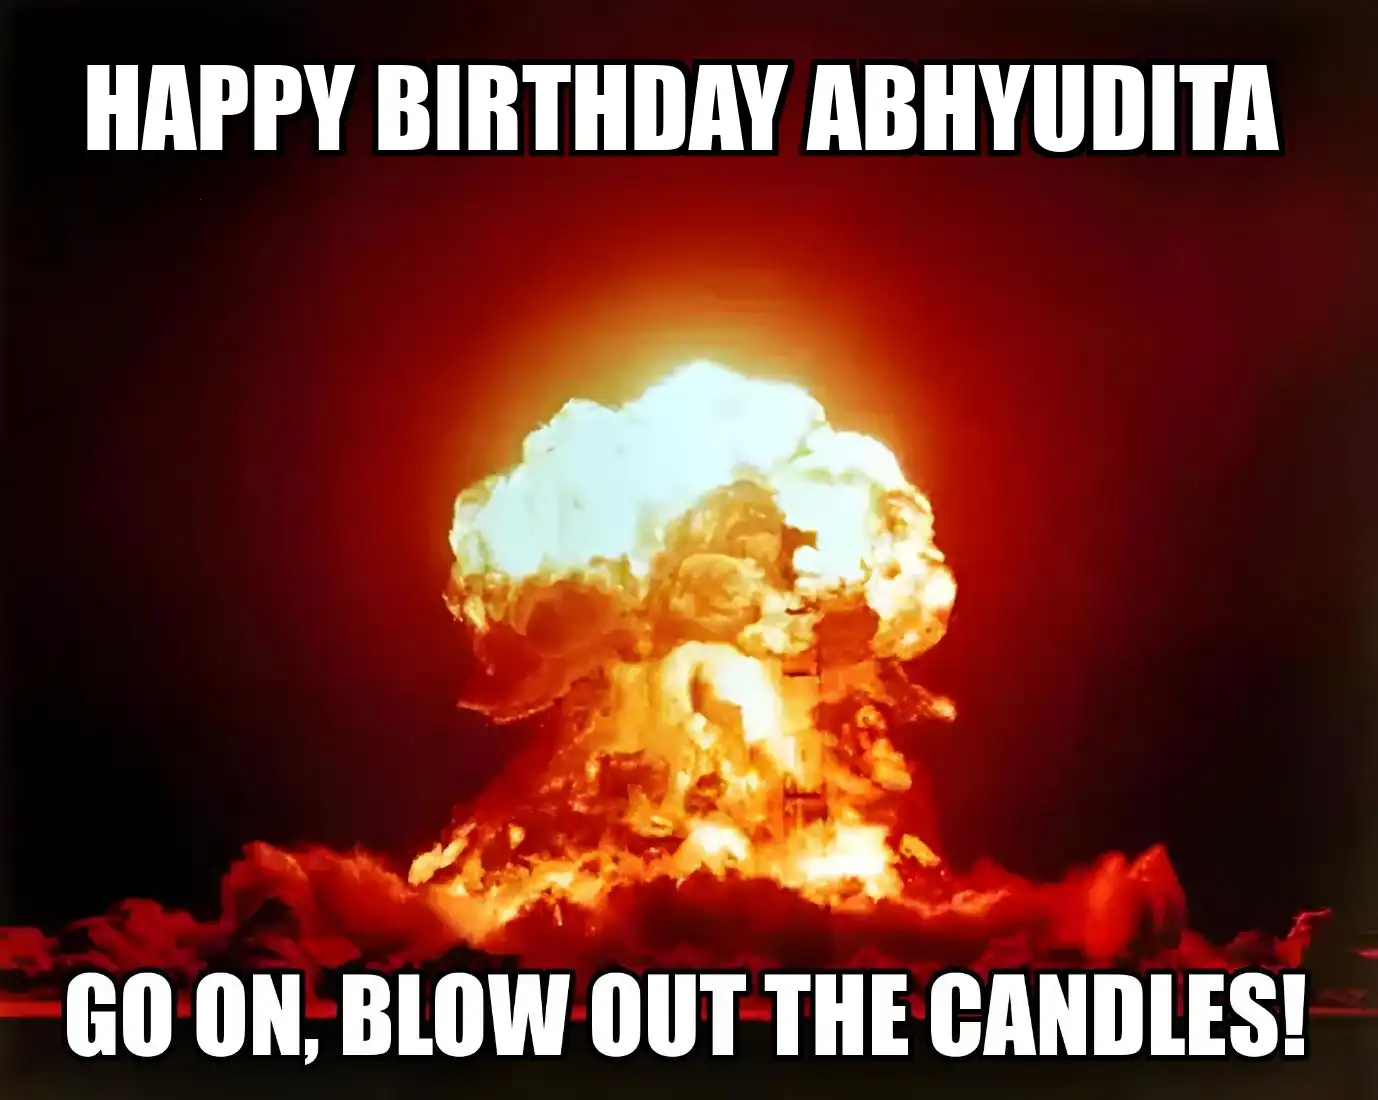 Happy Birthday Abhyudita Go On Blow Out The Candles Meme